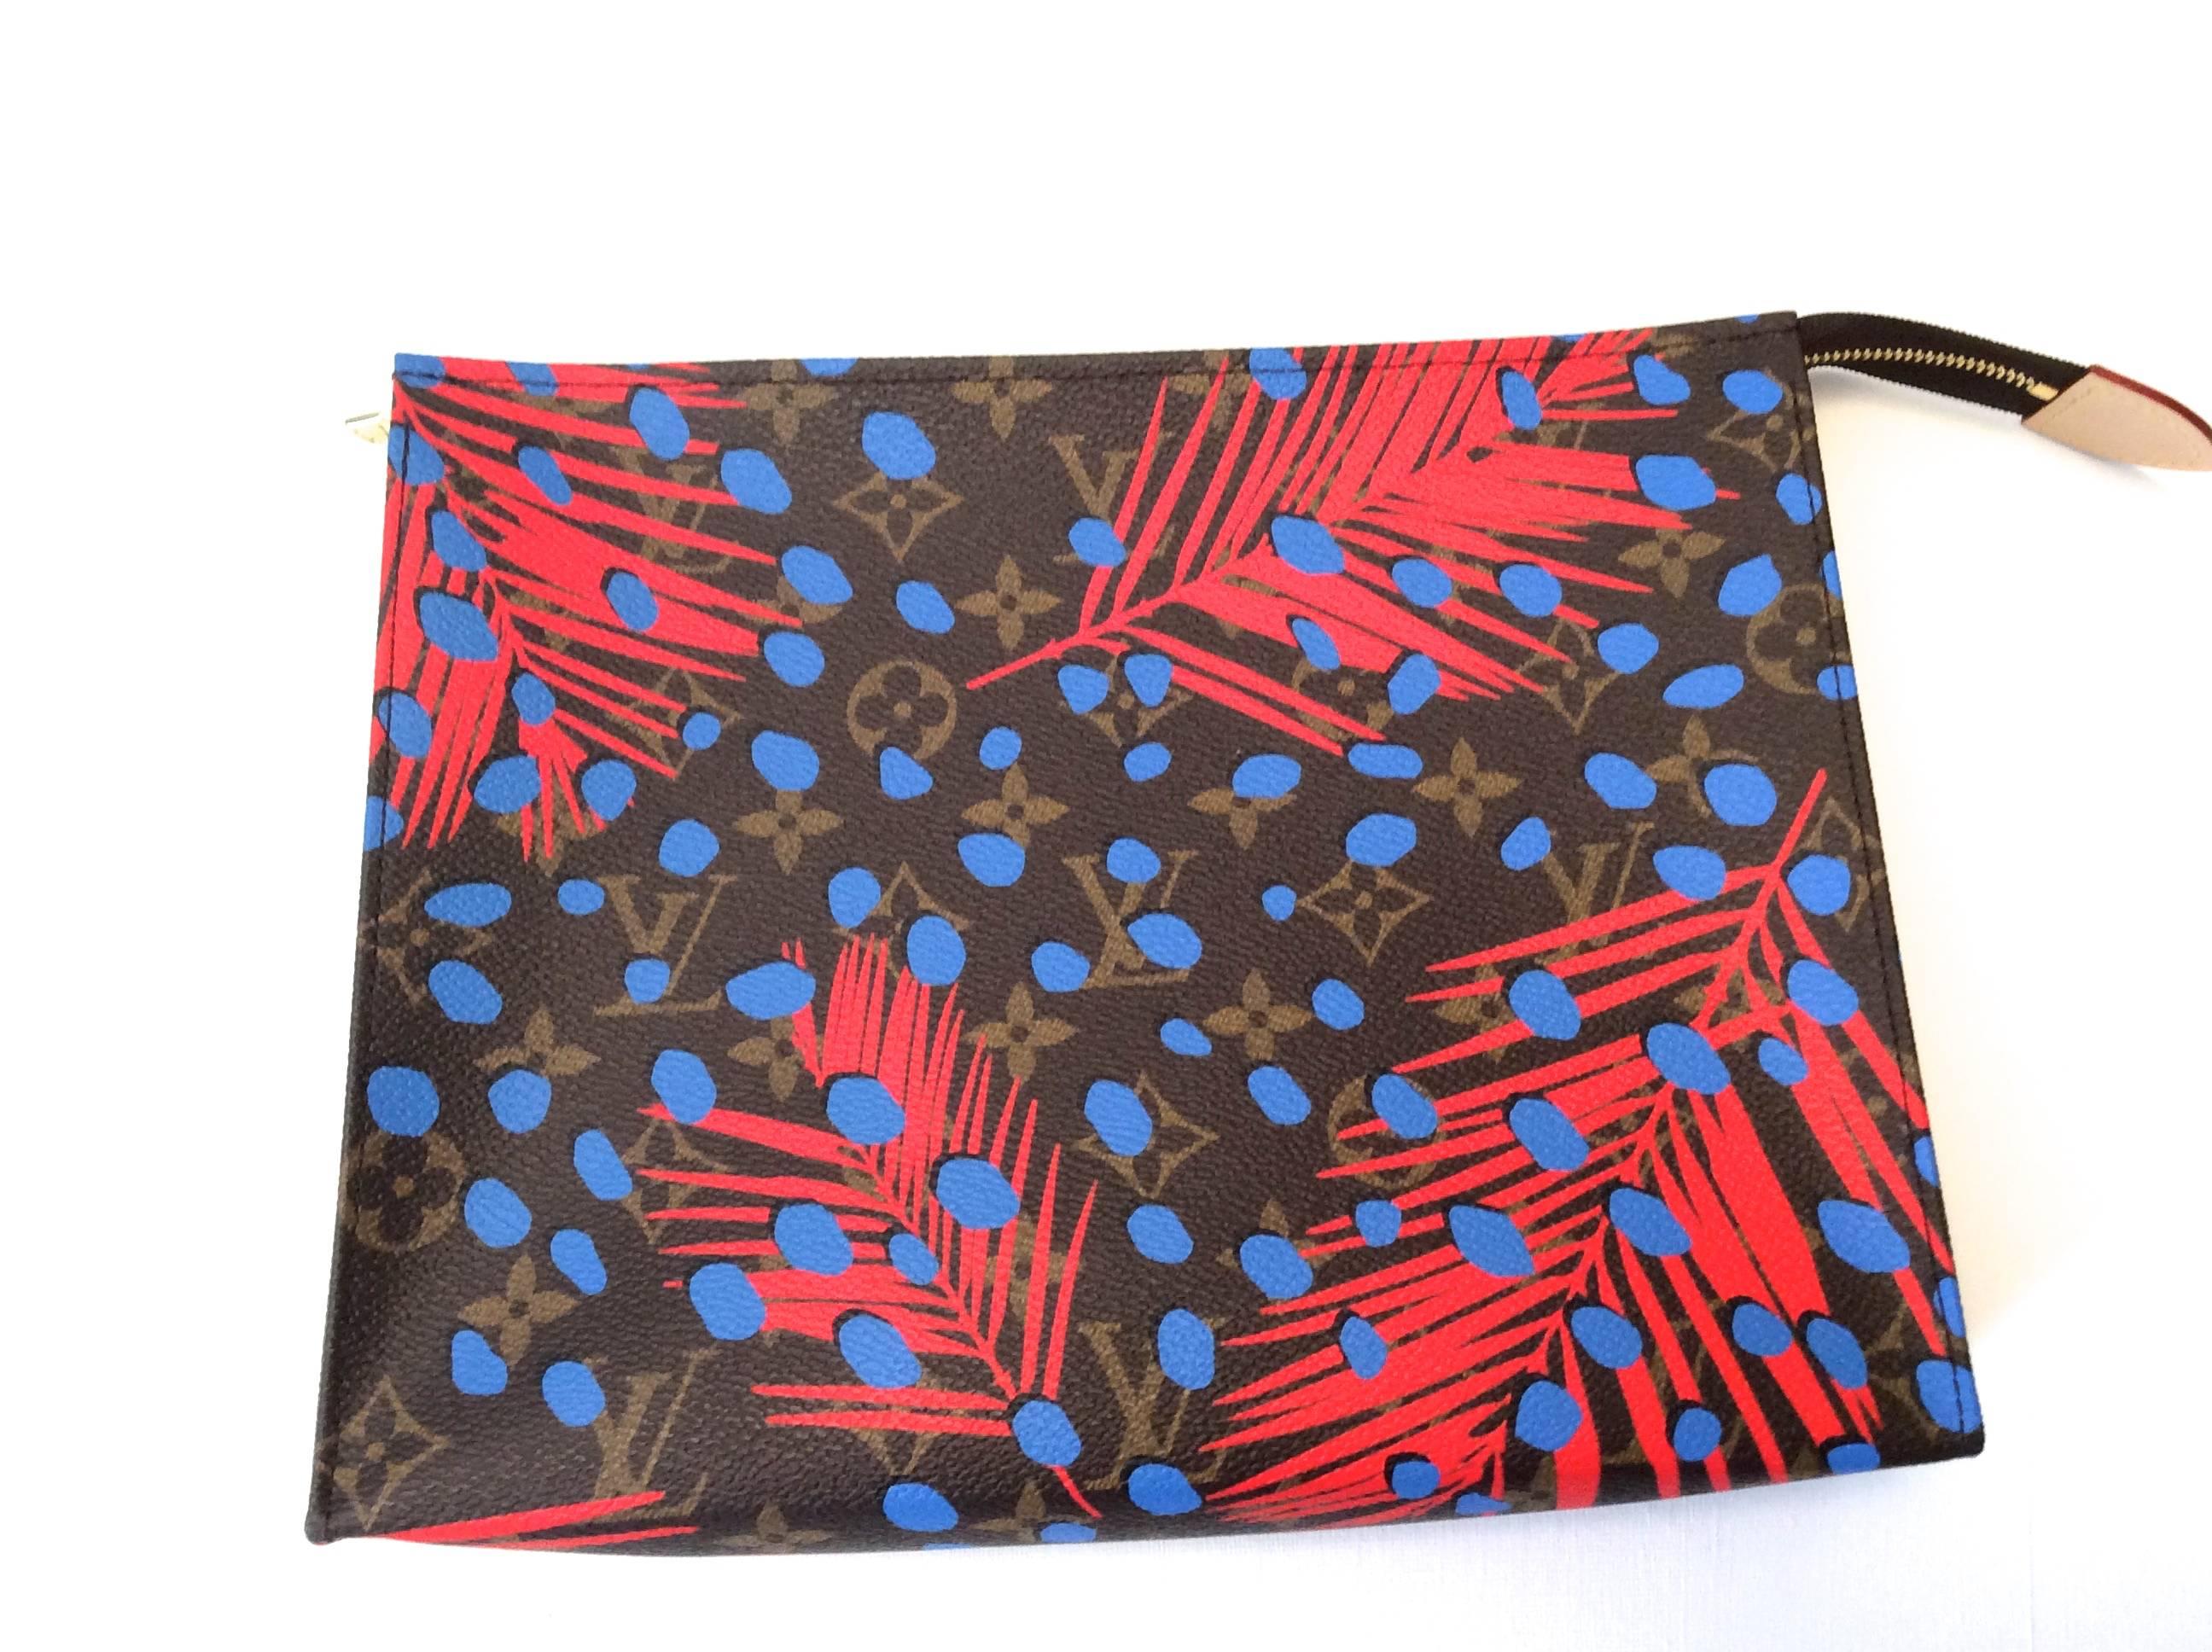 This Louis Vuitton Palm Springs Pochette Etoile clutch bag has the classic Louis Vuitton brown print with graphics of red leaves and blue dots on the exterior of the bag. The interior of the handbag is red. 

This bag is a limited edition that is